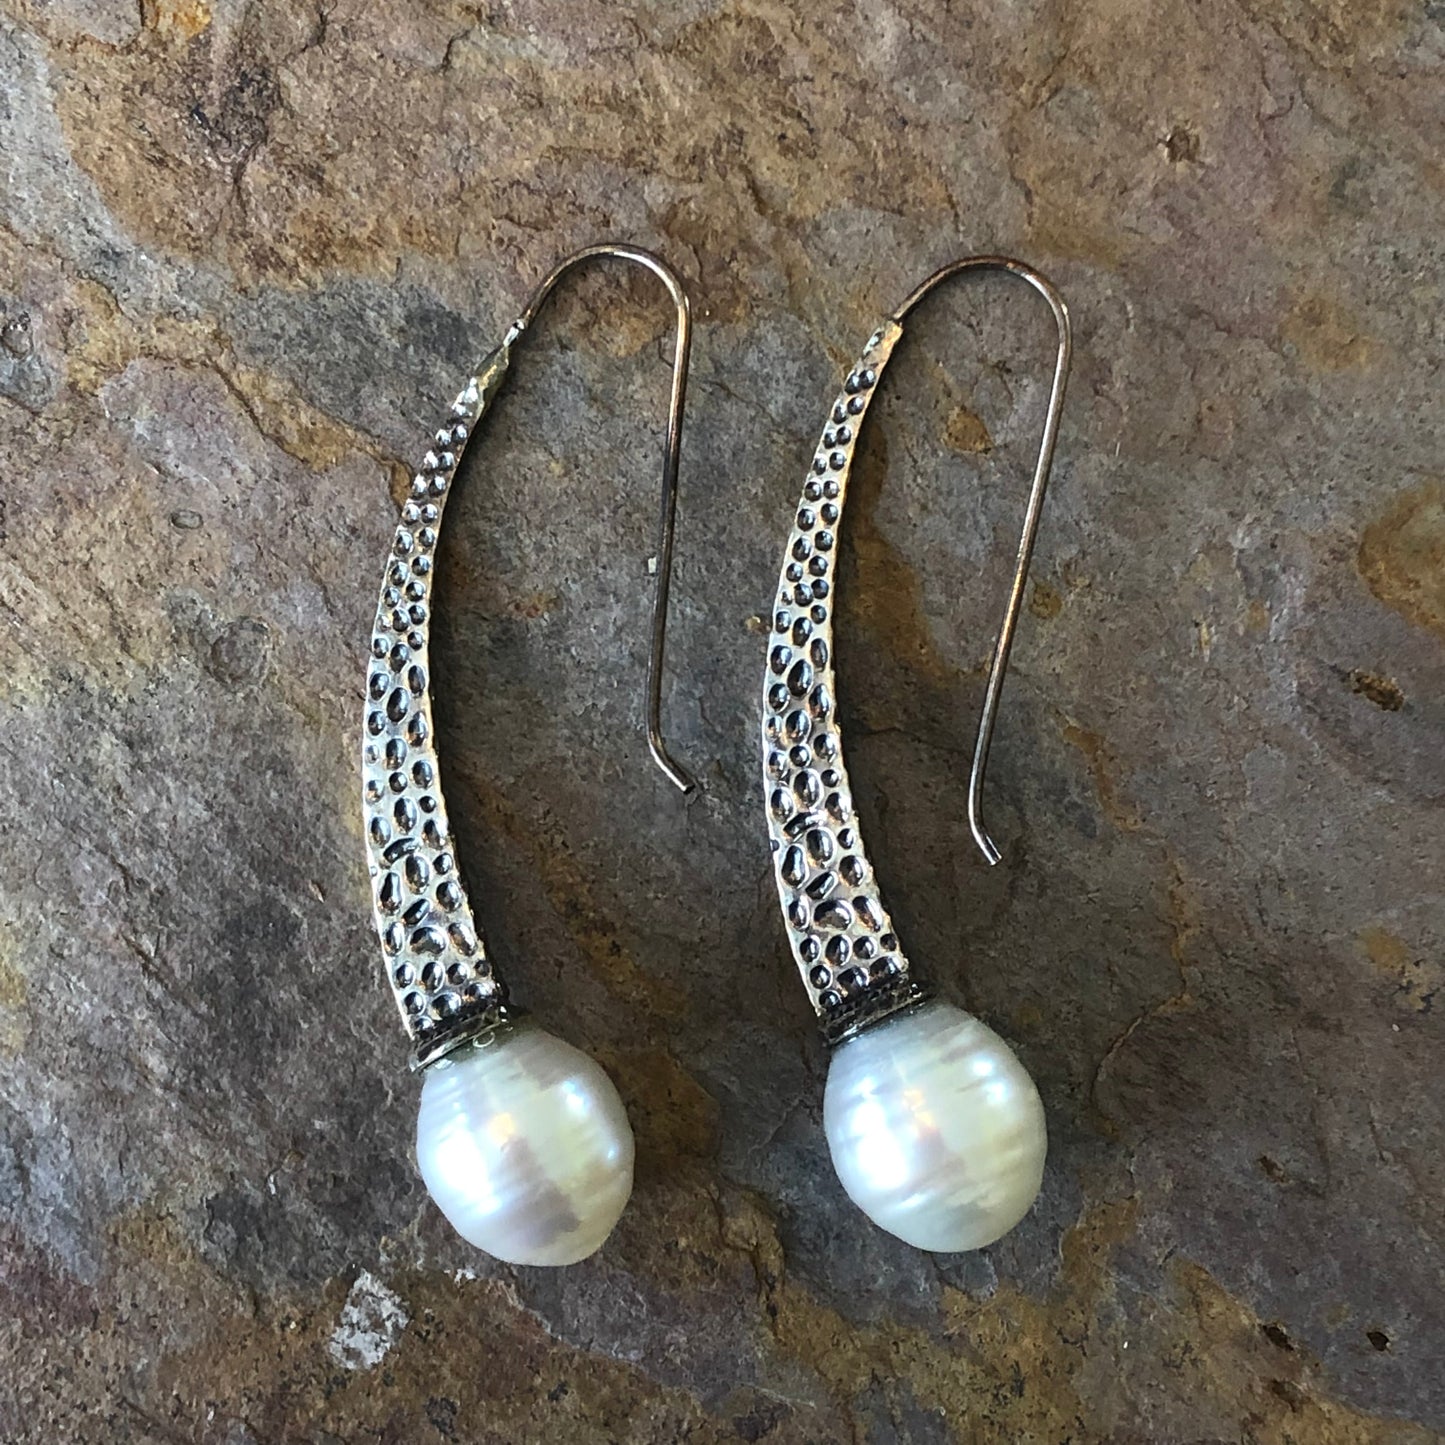 Sterling Silver + Paspaley South Sea Pearl Textured Earrings, Sterling Silver + Paspaley South Sea Pearl Textured Earrings - Legacy Saint Jewelry